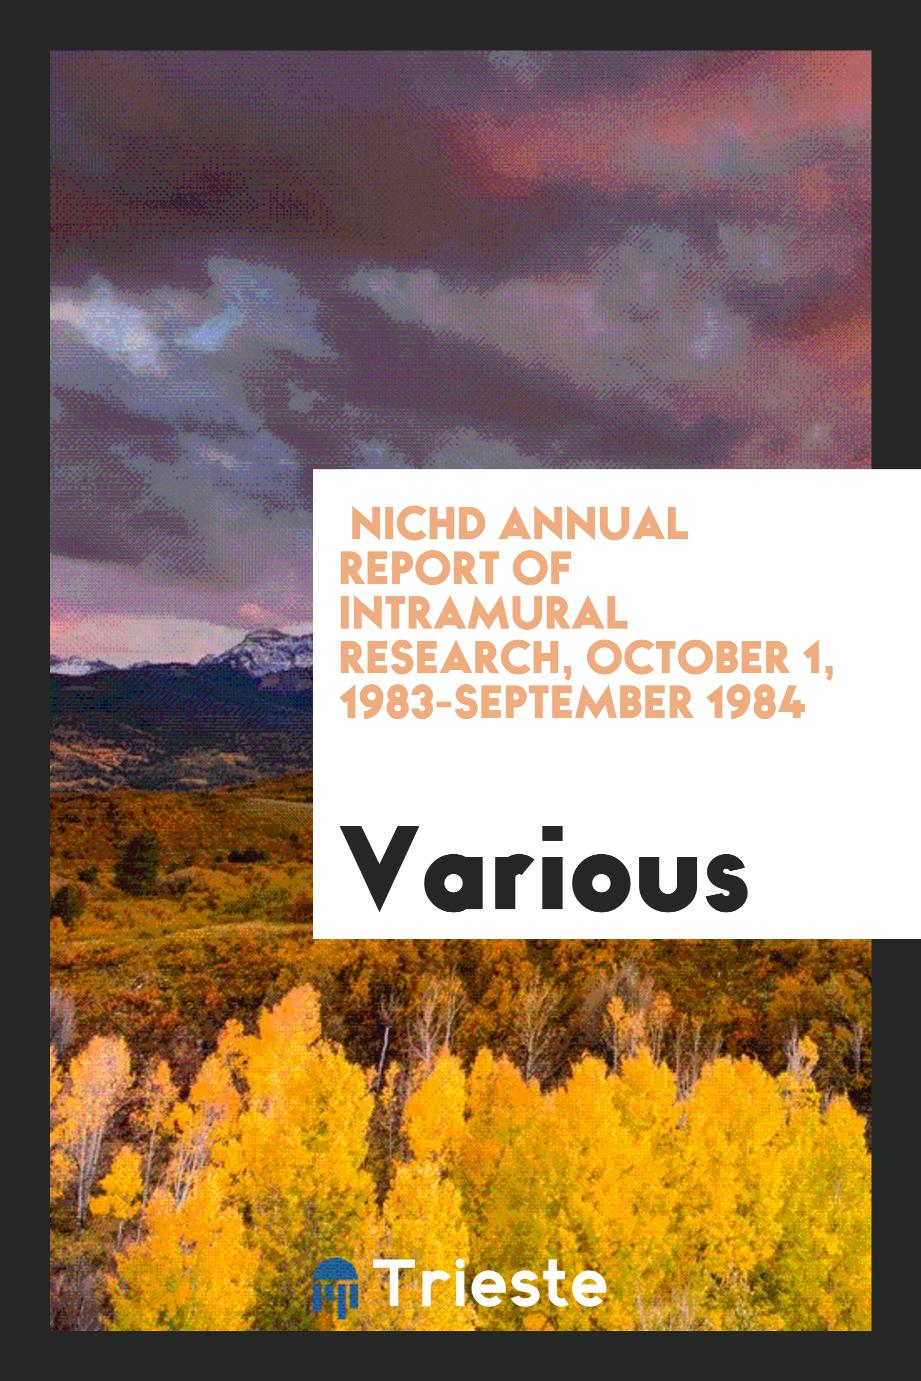 Nichd Annual report of Intramural Research, October 1, 1983-september 1984